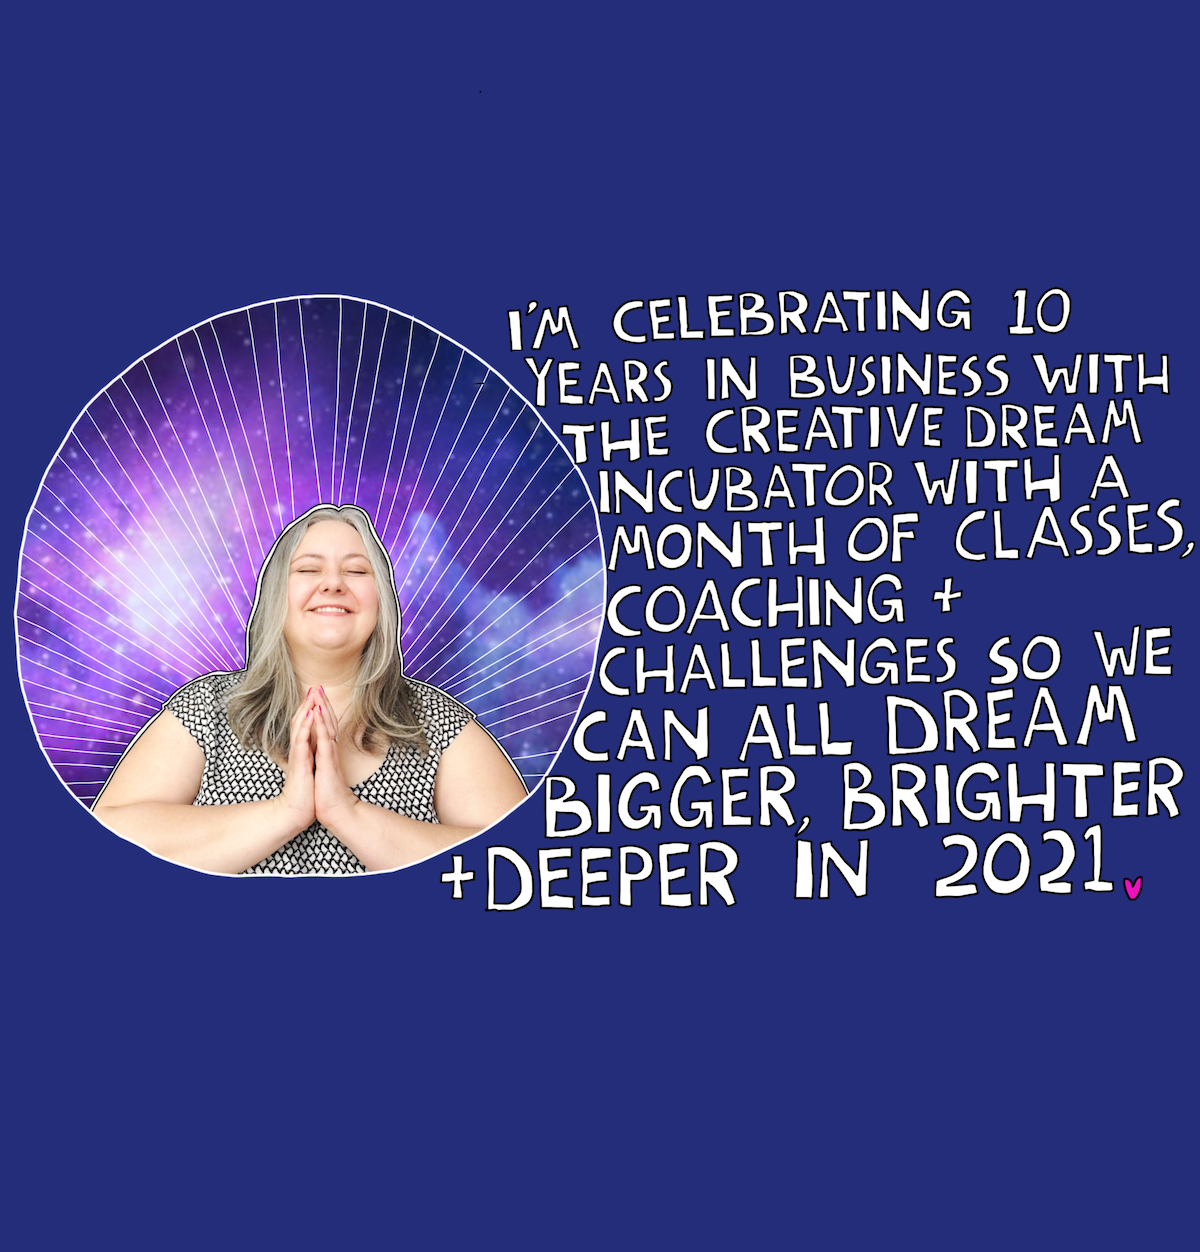 Celebrating 10 years in business with an epic month of free classes + coaching